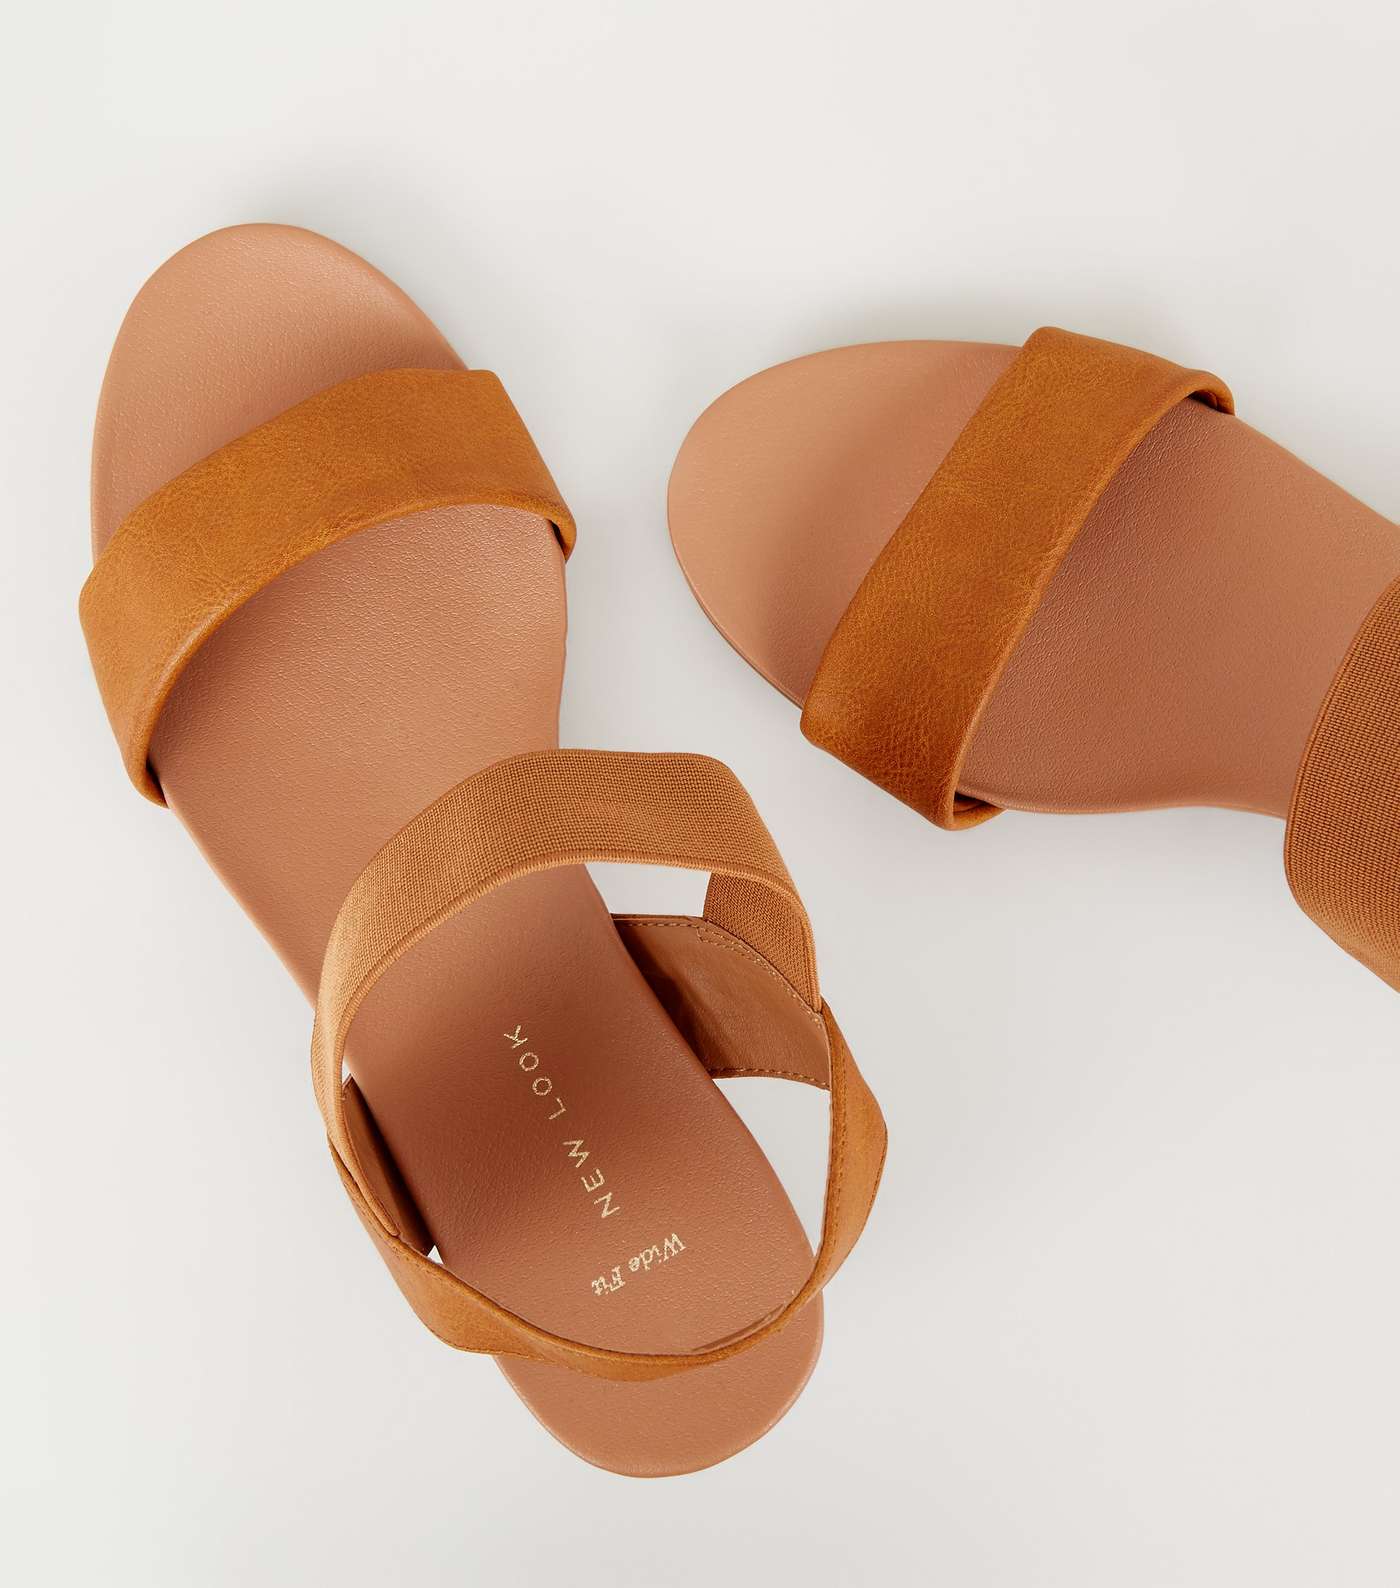 Wide Fit Tan Leather-Look Low Heel Sandals Image 4